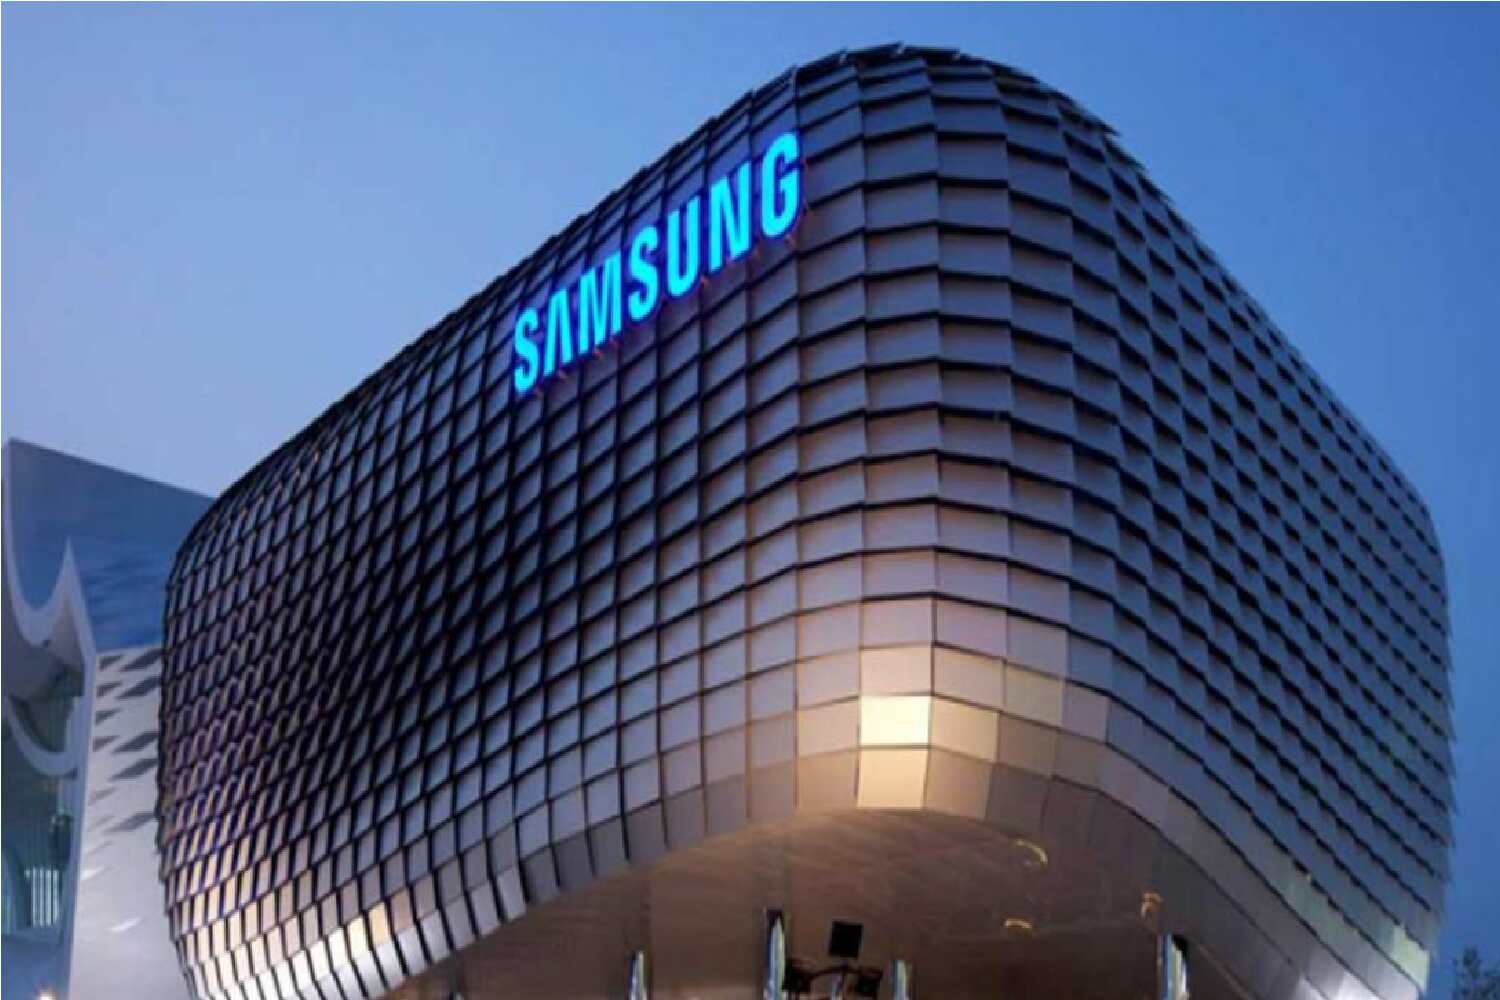 Samsung is coming to India, bumper recruitment on engineer posts